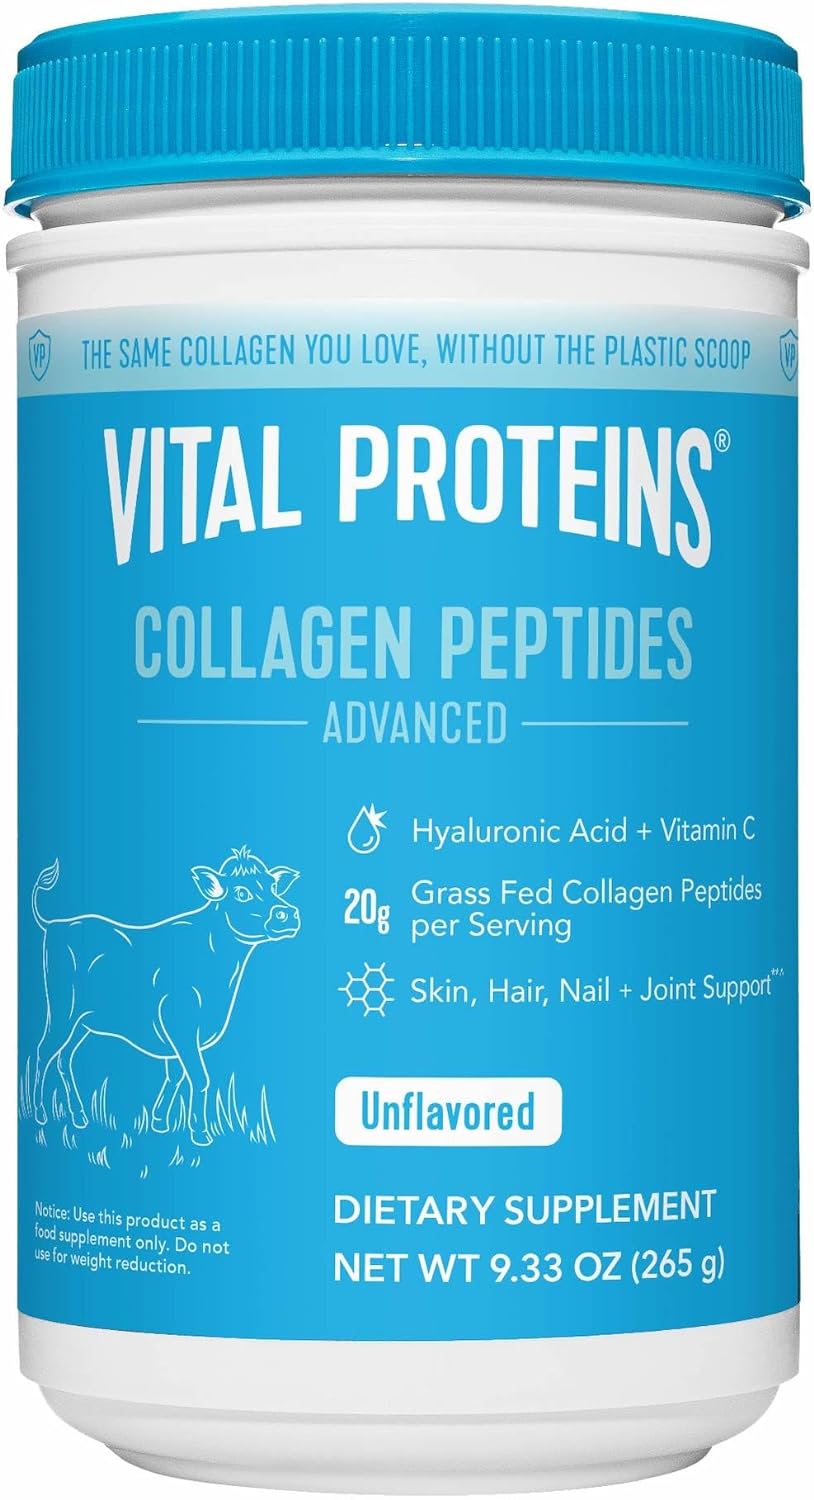 Wholesale prices with free shipping all over United States Vital Proteins Collagen Peptides Powder with Hyaluronic Acid and Vitamin C, Unflavored, 20 oz - Steven Deals